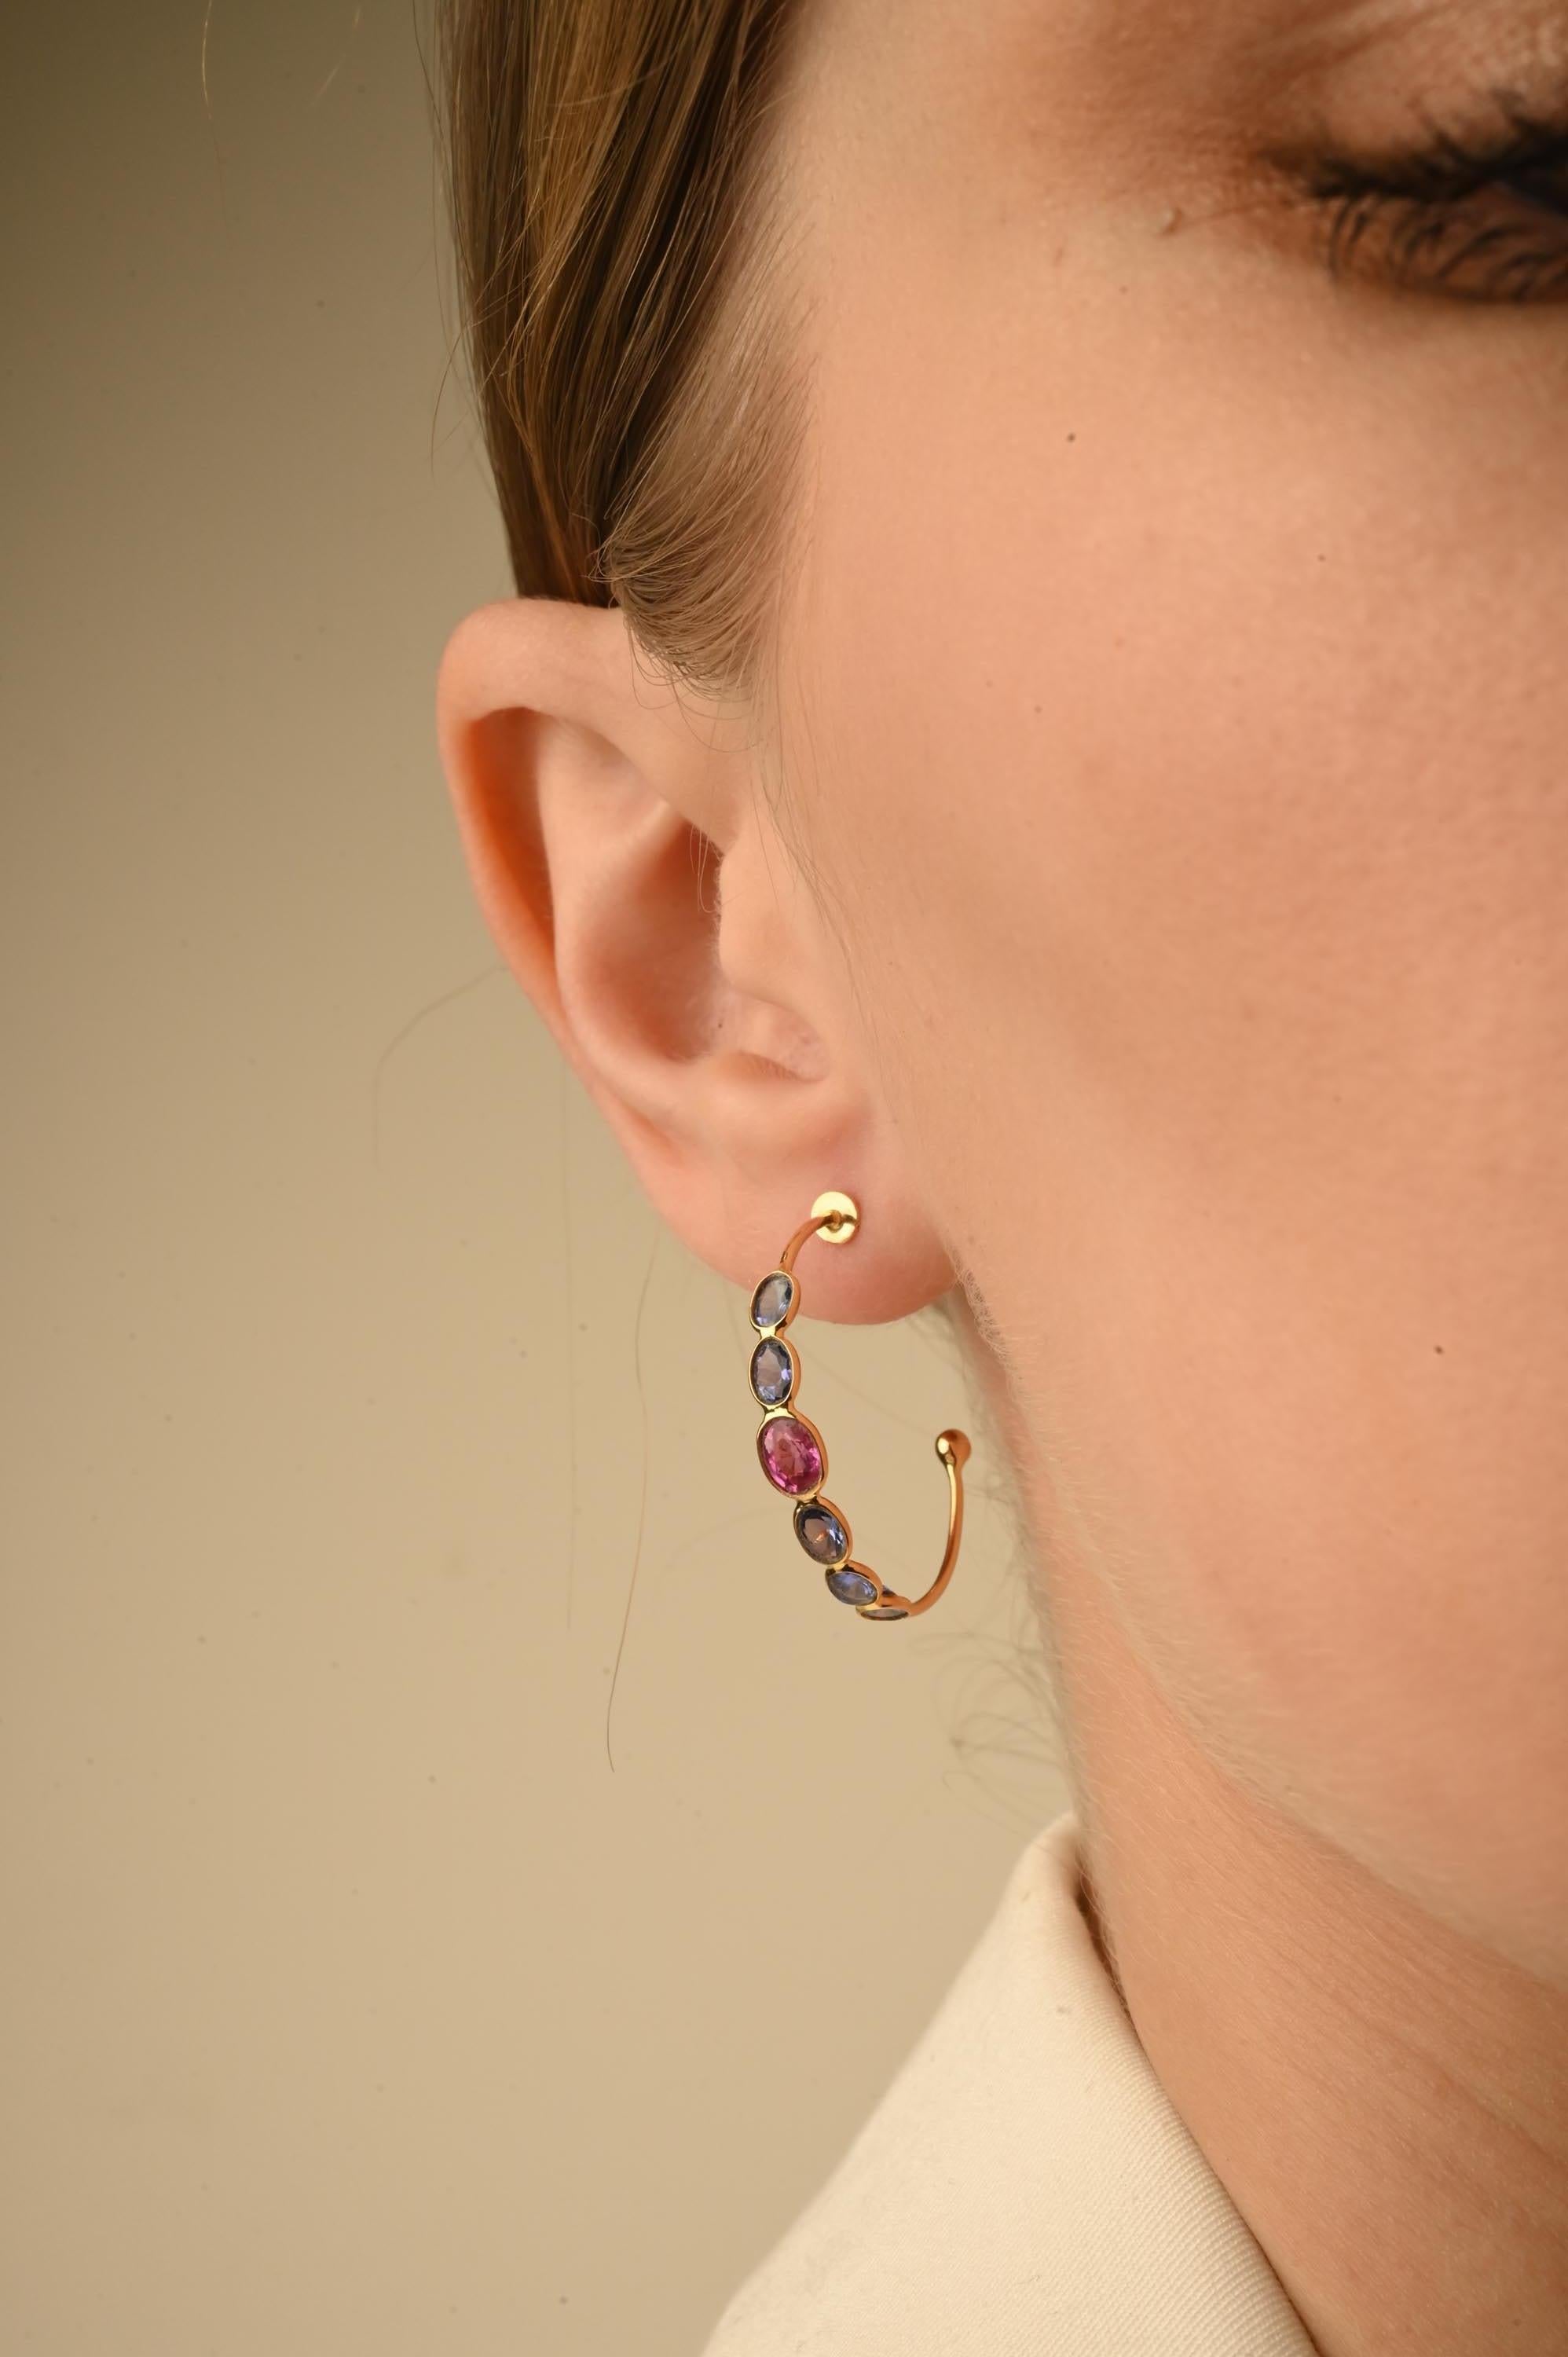 Multi Sapphire Hoop Earrings in 14K Gold to make a statement with your look. You shall need open hoop earrings to make a statement with your look. These earrings create a sparkling, luxurious look featuring oval cut gemstone.
Sapphire stimulates